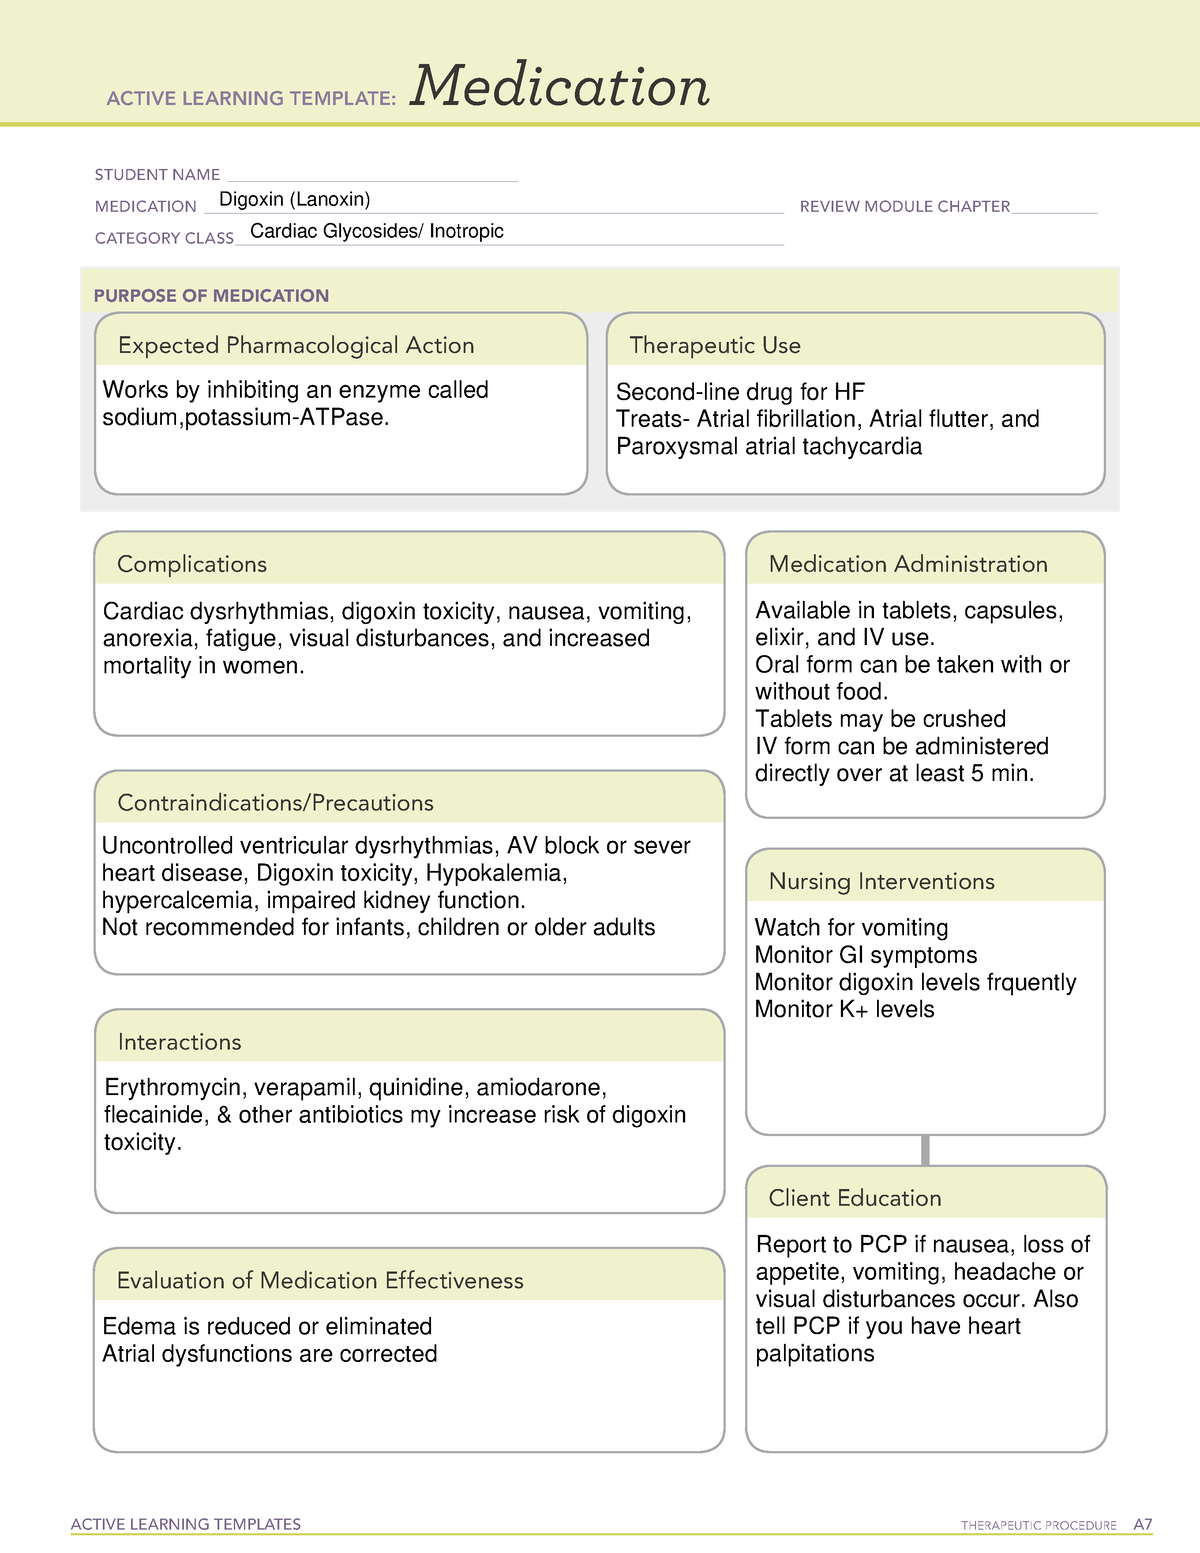 ATI Digoxin (Lanoxin) Med Sheet ACTIVE LEARNING TEMPLATES THERAPEUTIC